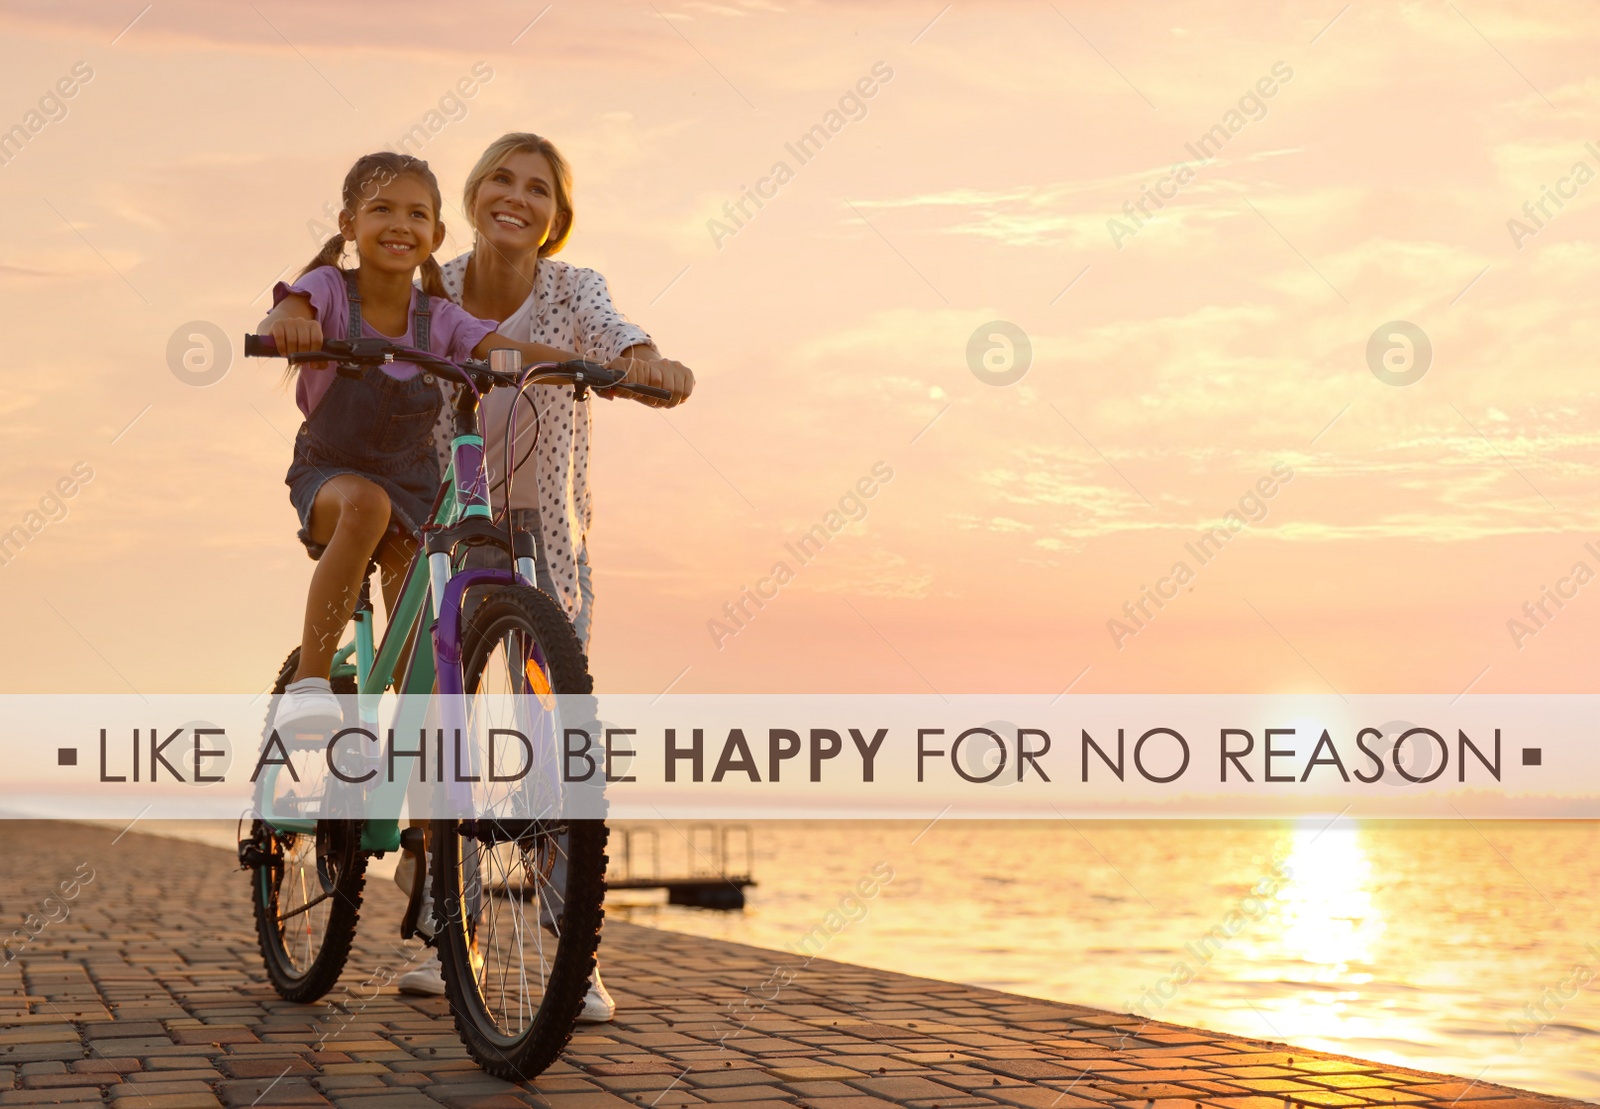 Image of Like A Child, Be Happy For No Reason. Inspirational quote saying that you don't need anything to feel happiness. Text against mother teaching daughter to ride bicycle outdoors